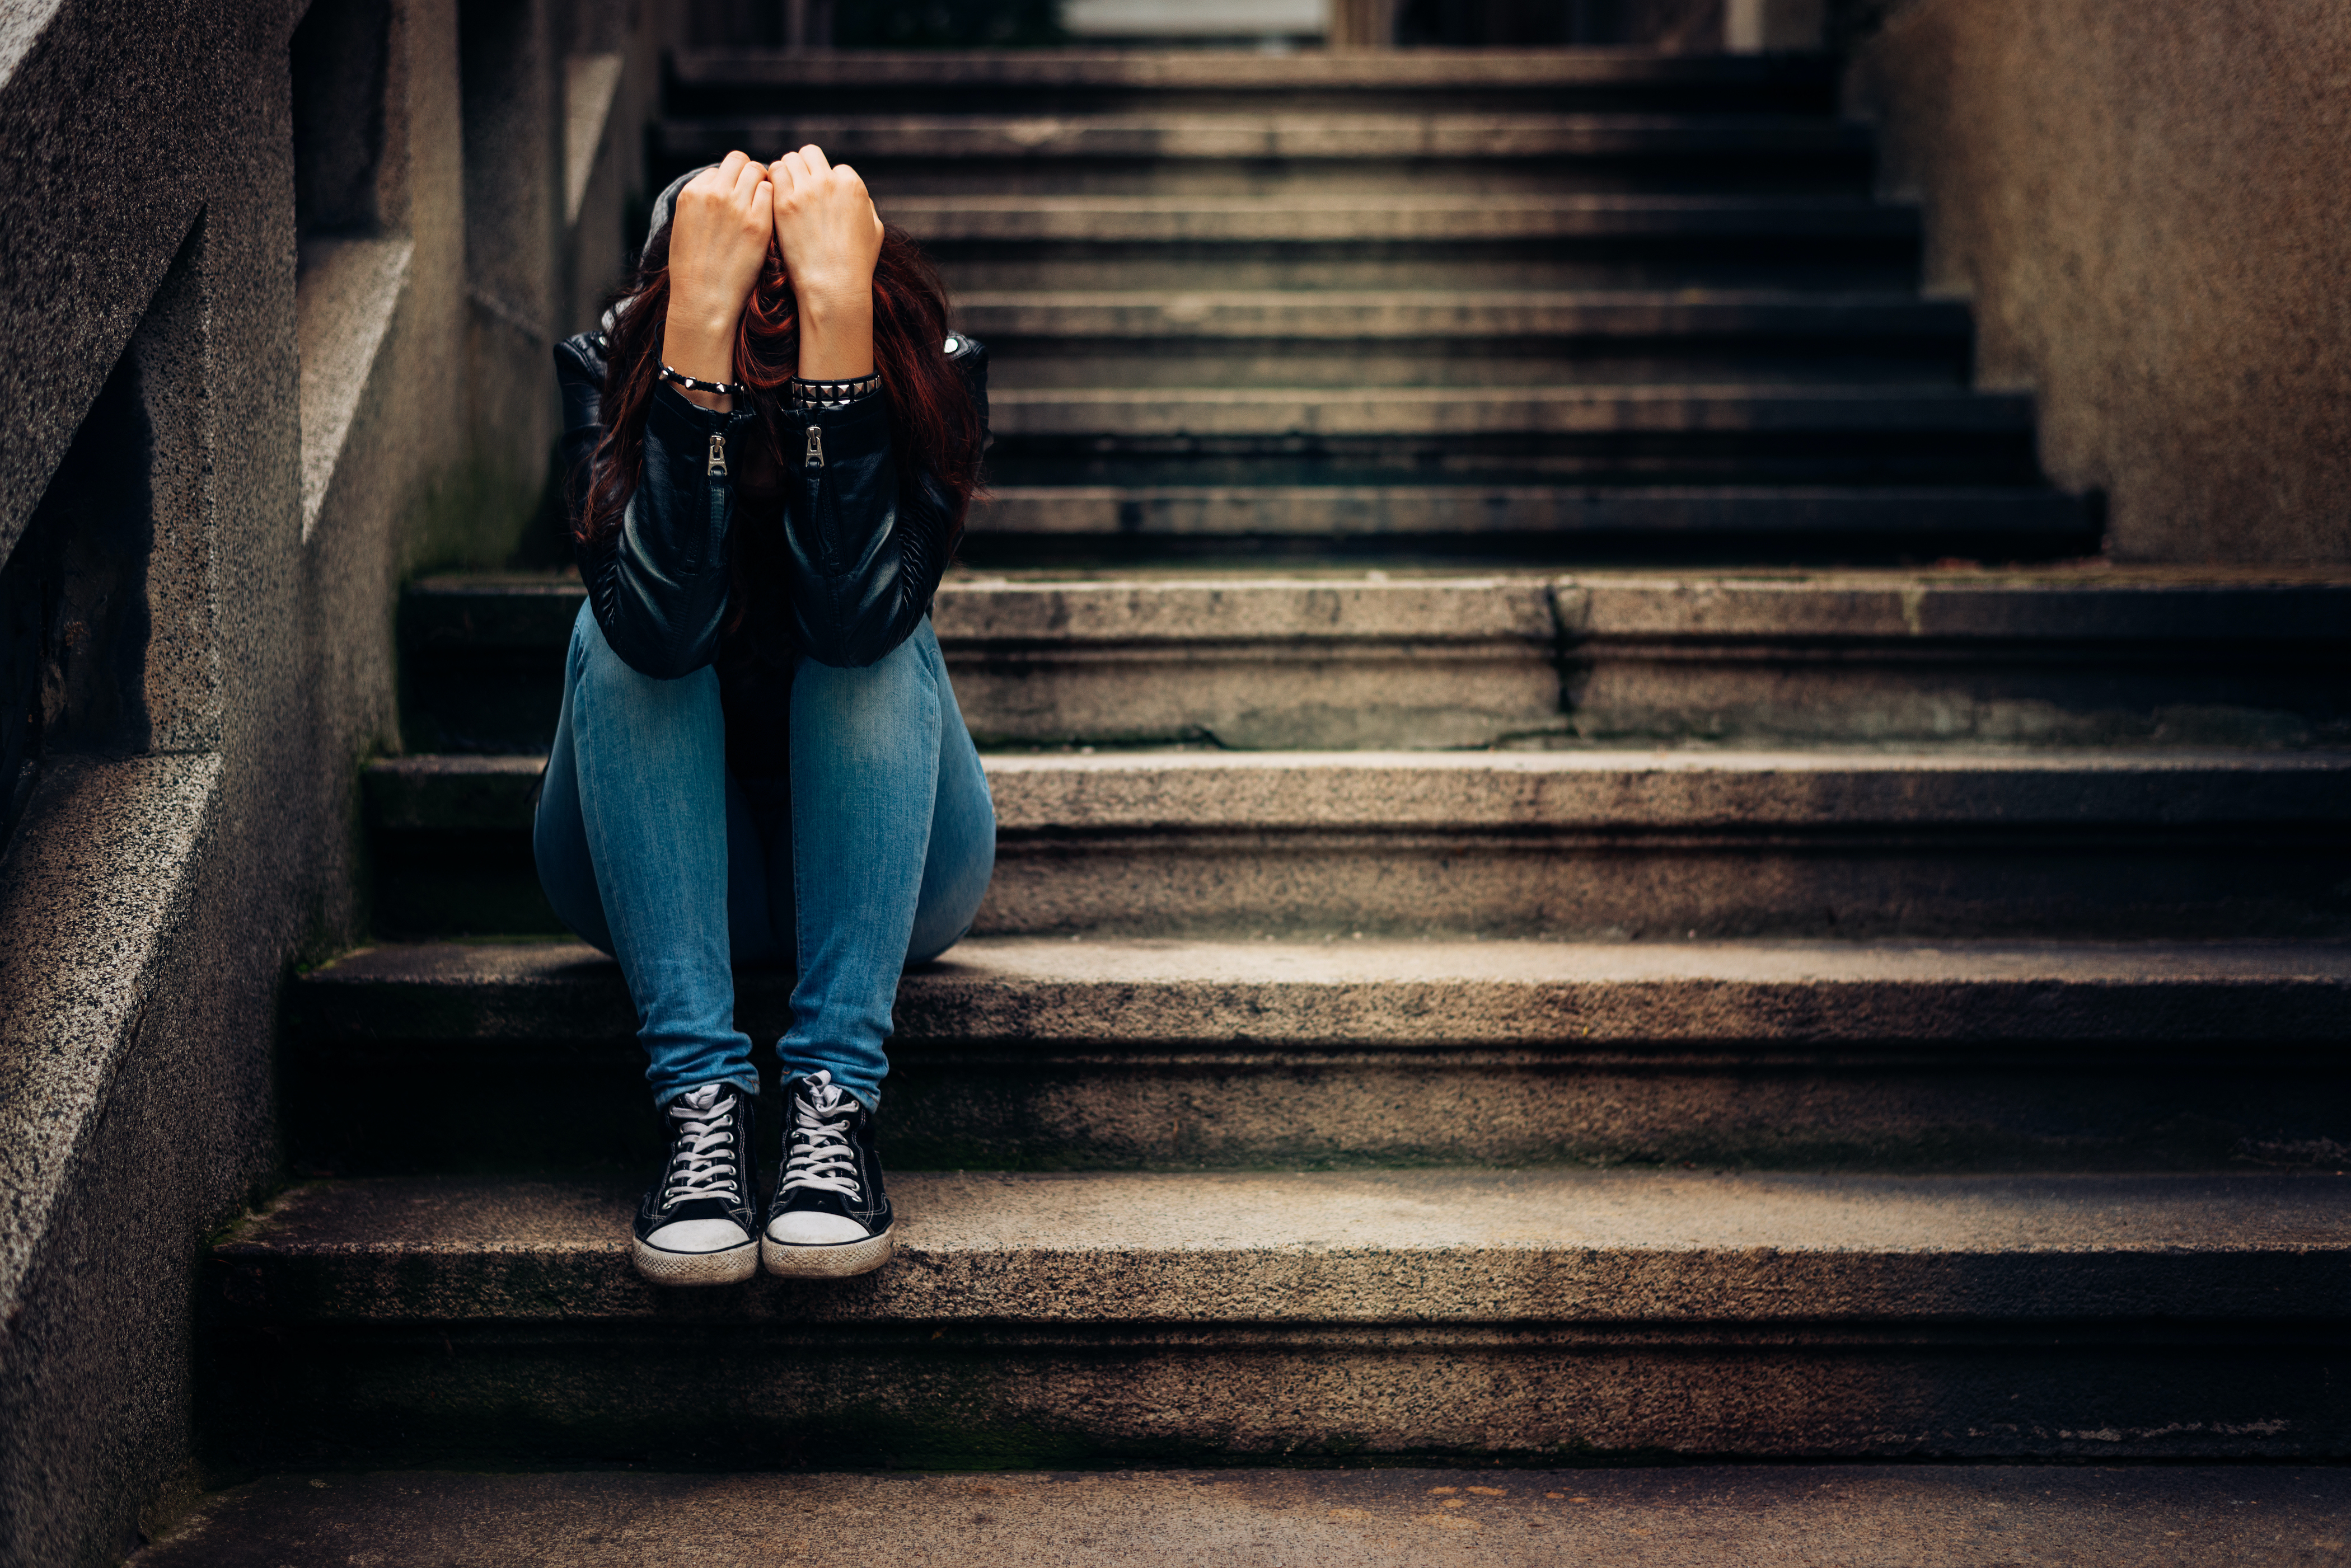 A young person wearing jeans and Converse-style shoes sits on concrete steps holding their head in their hands